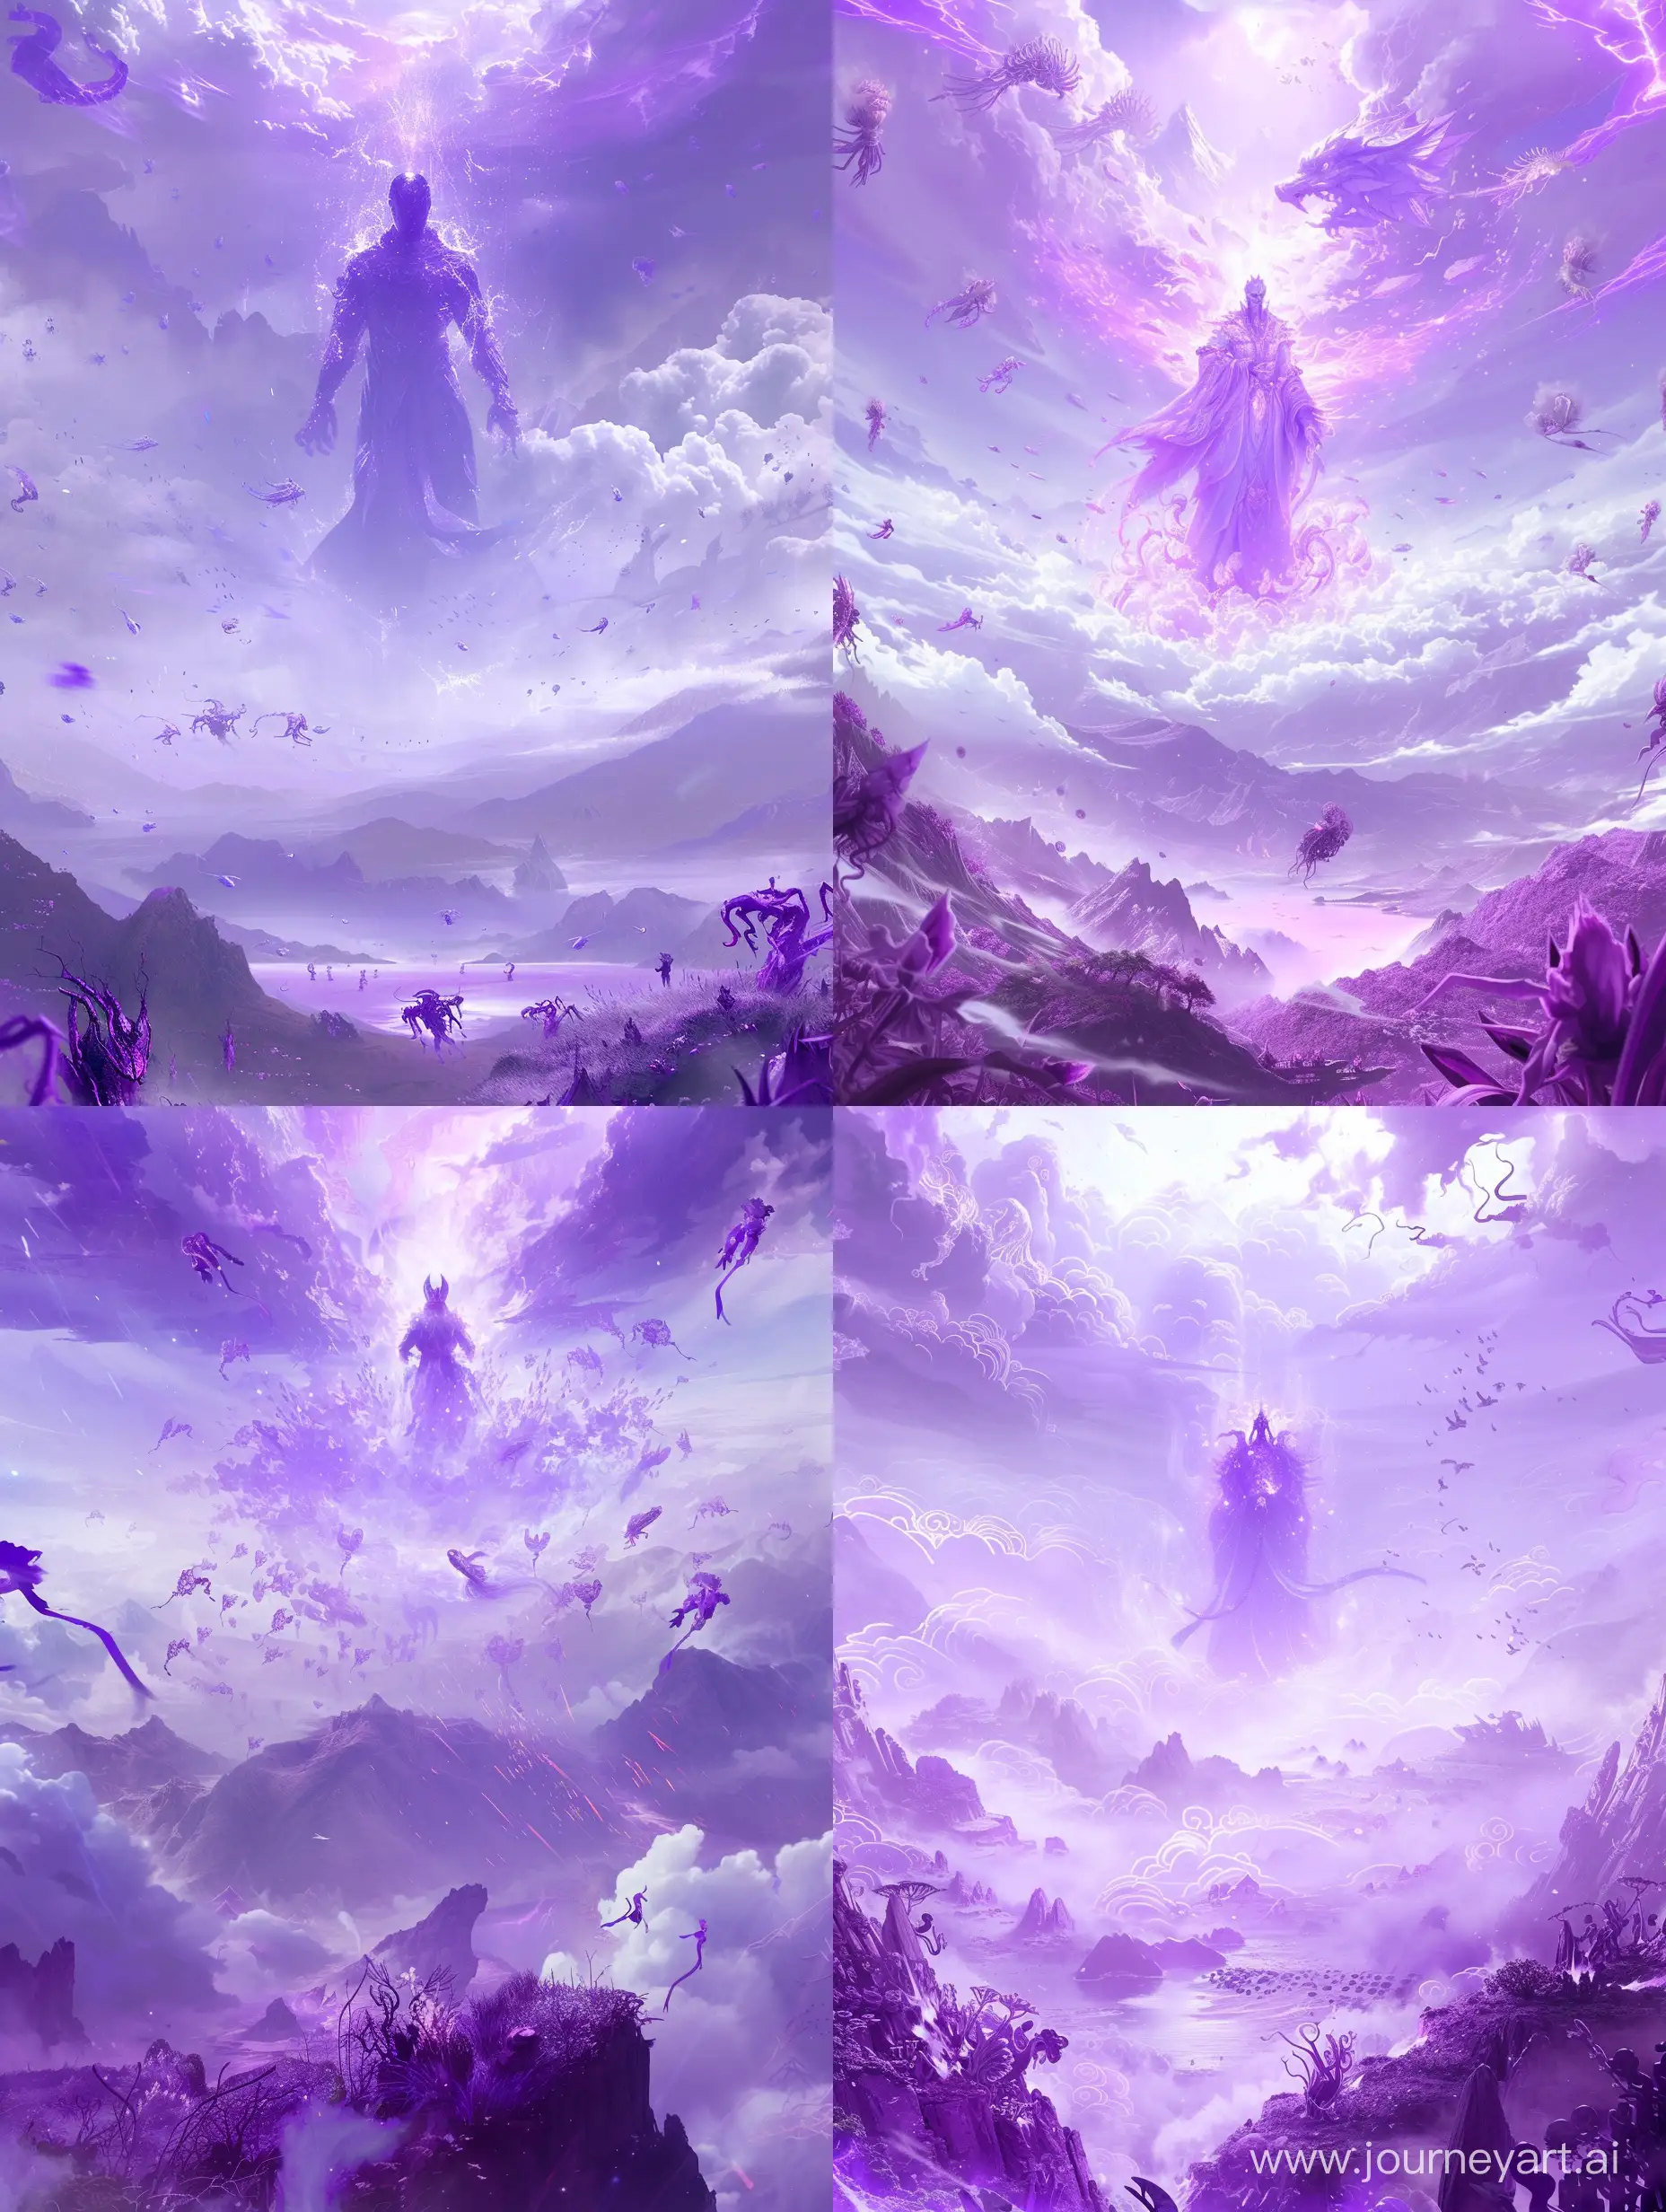 Majestic-Purple-Violet-Emperor-Surrounded-by-Mystical-Aura